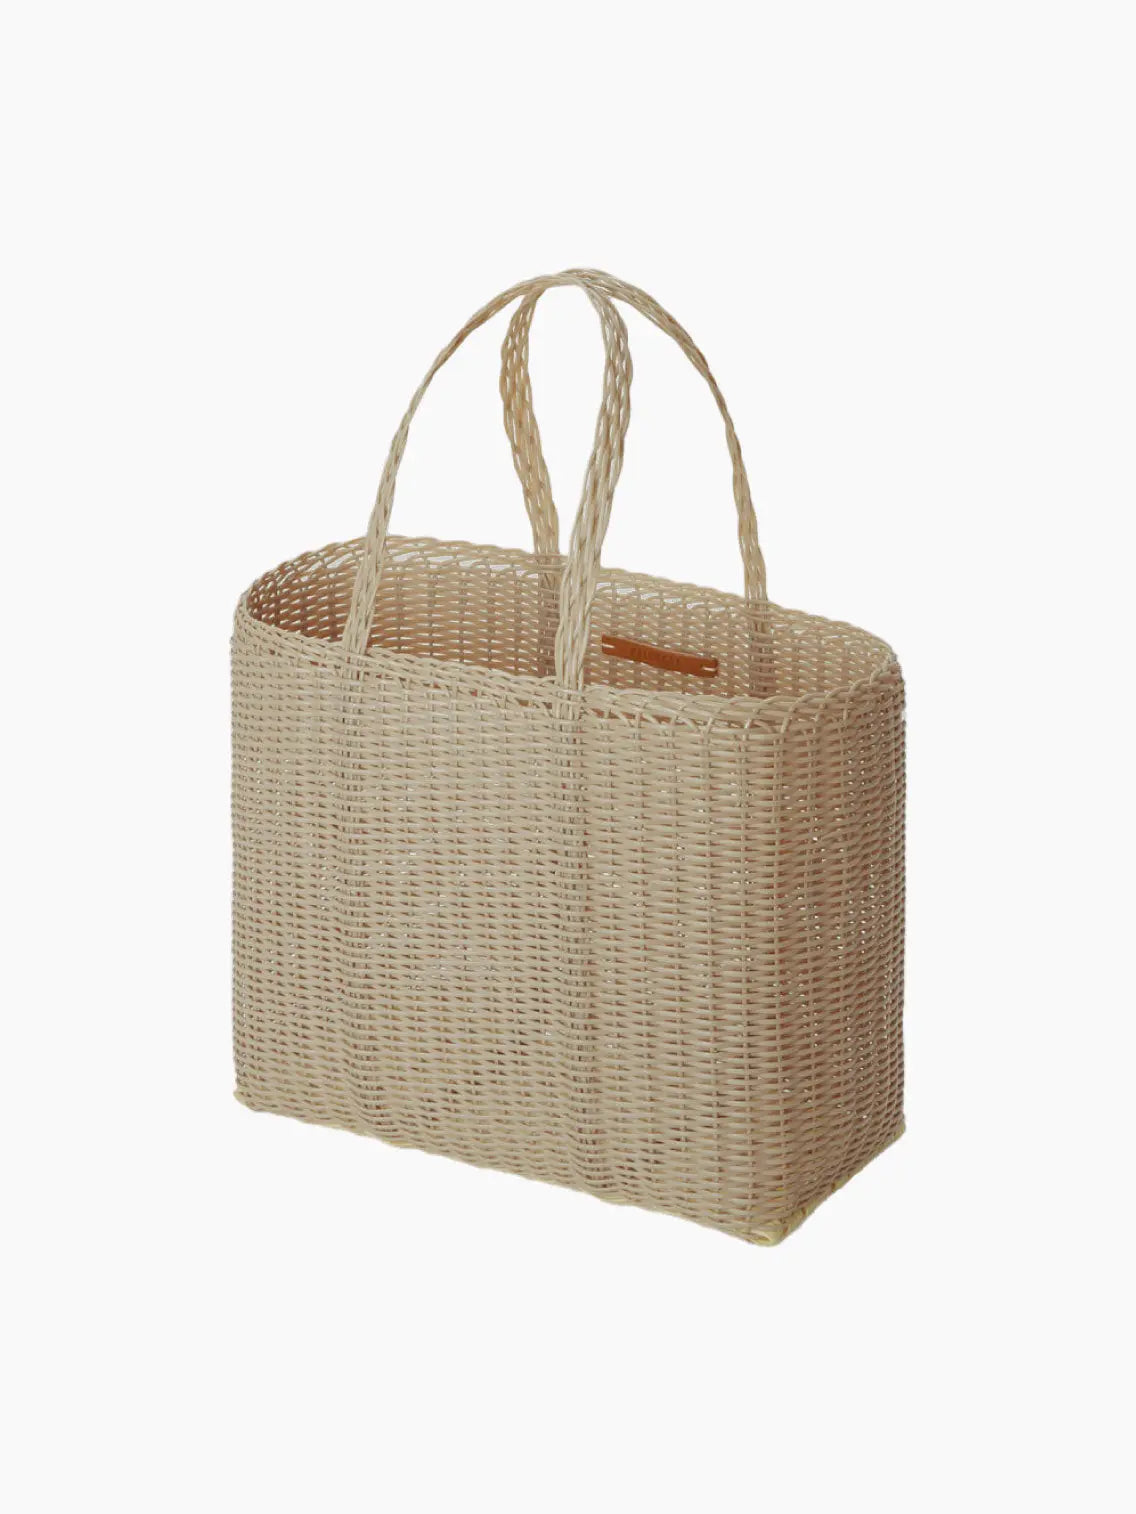 A Palorosa Flat Small Sand Bag from bassalstore, featuring two rounded handles for easy carrying. The bag has a natural, beige color and boasts a simple, minimalist design. Its uniform weaving pattern gives it a sturdy appearance. The background is plain white, enhancing its elegant look.